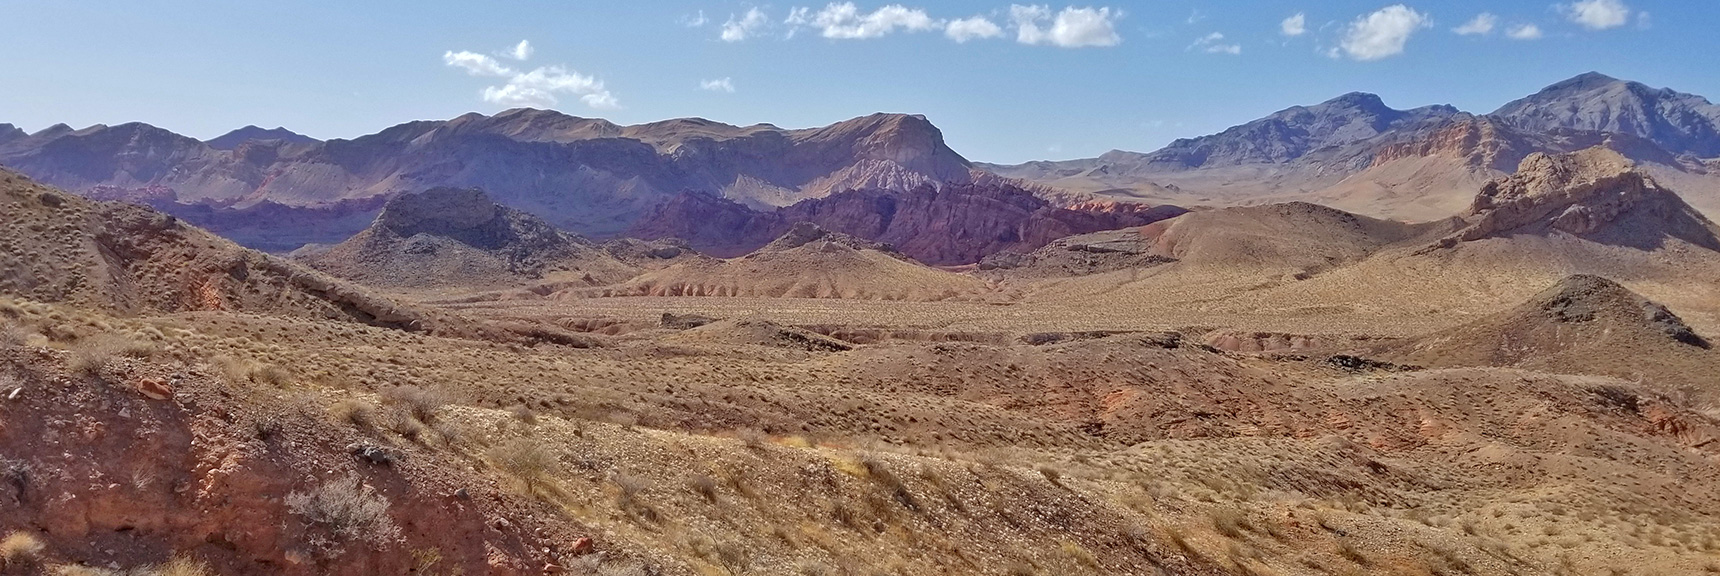 Return Route to Northshore Summit in the Distance | Northern Bowl of Fire | Lake Mead National Recreation Area, Nevada